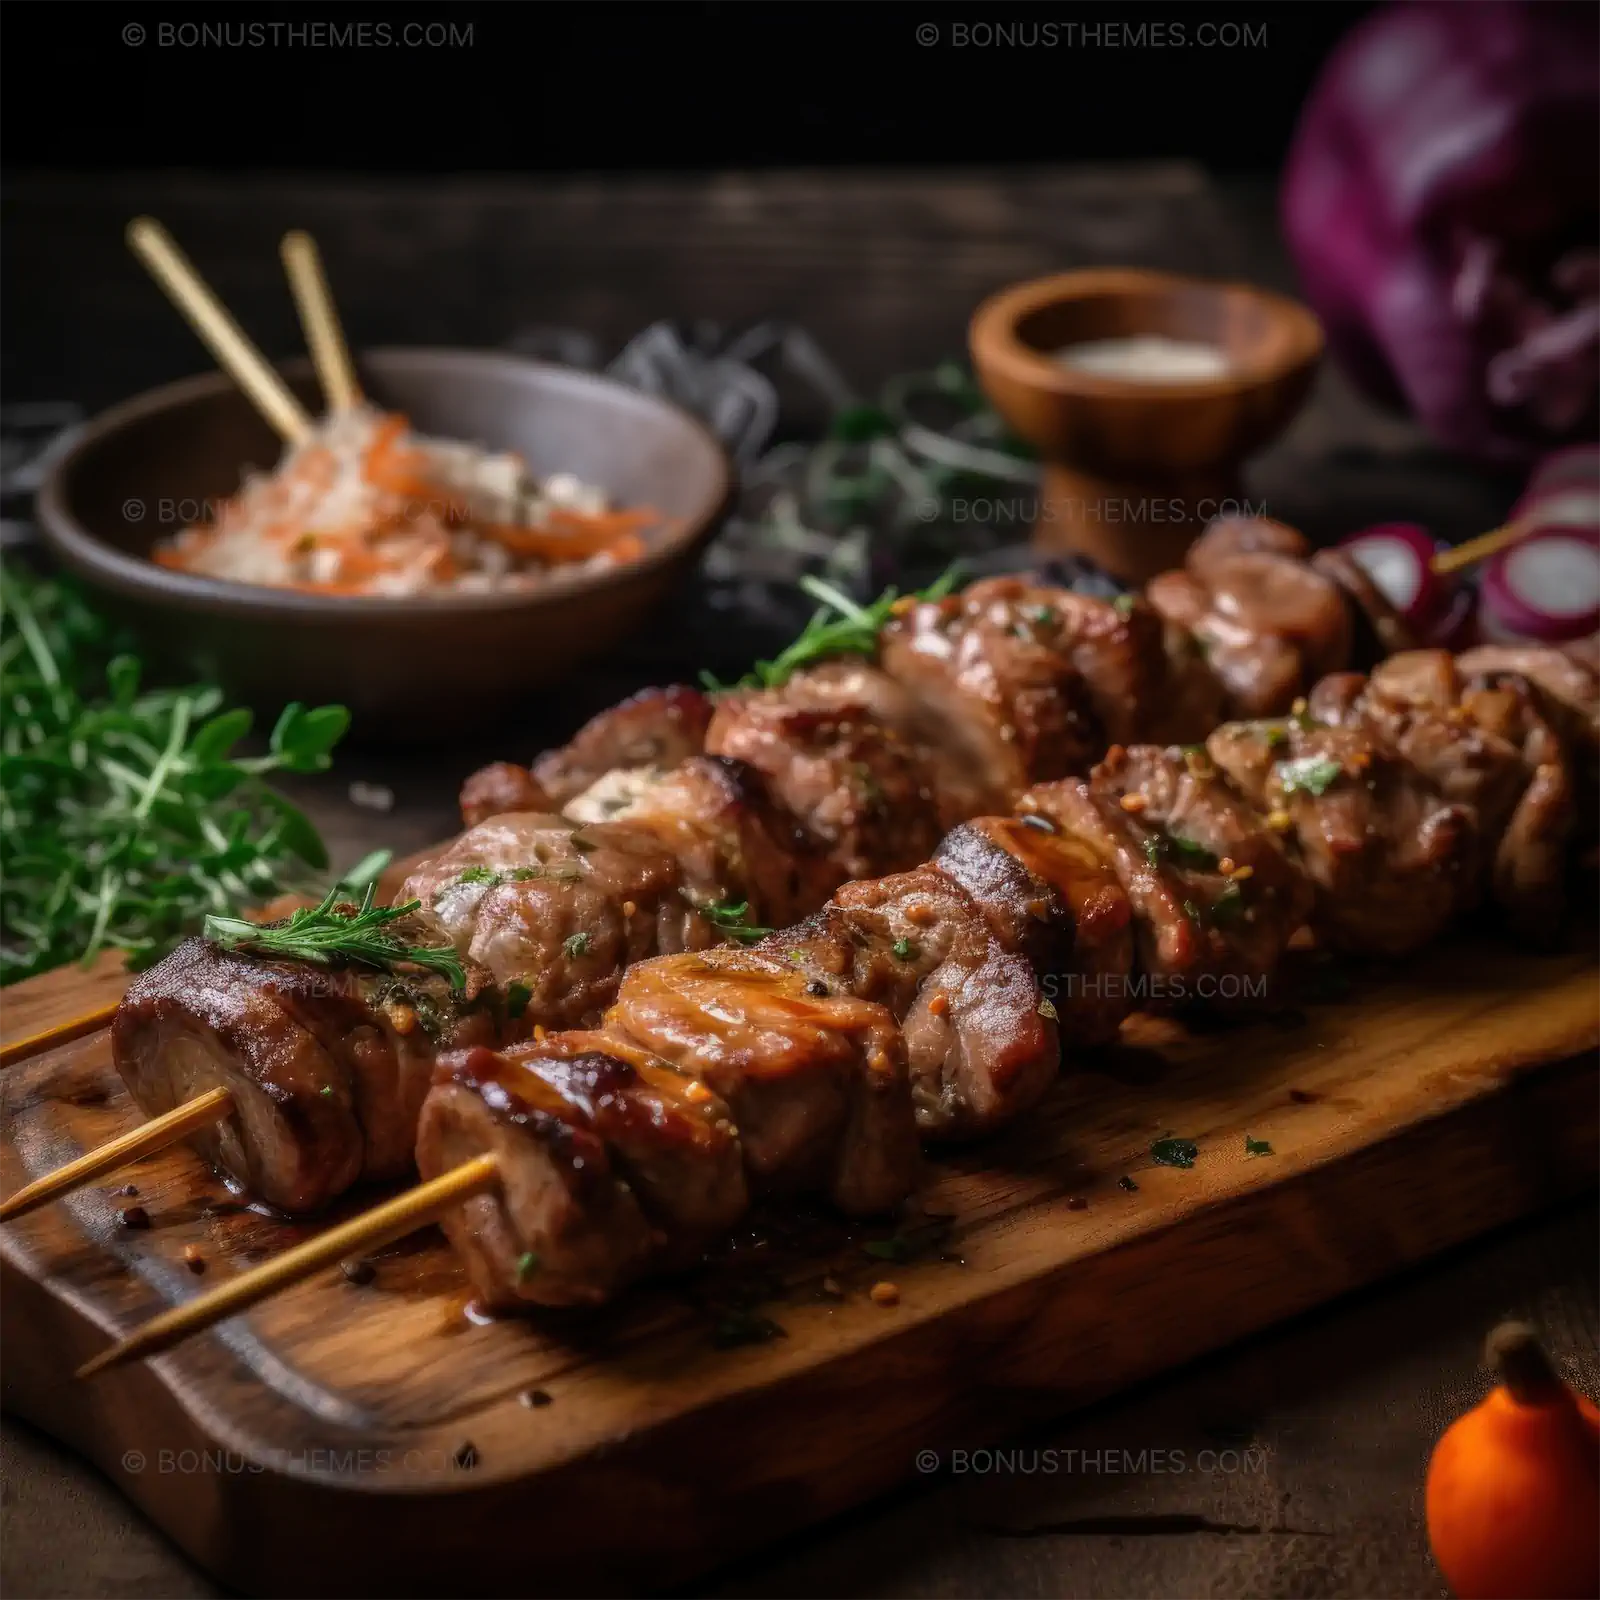 Succulent grilled meat skewers